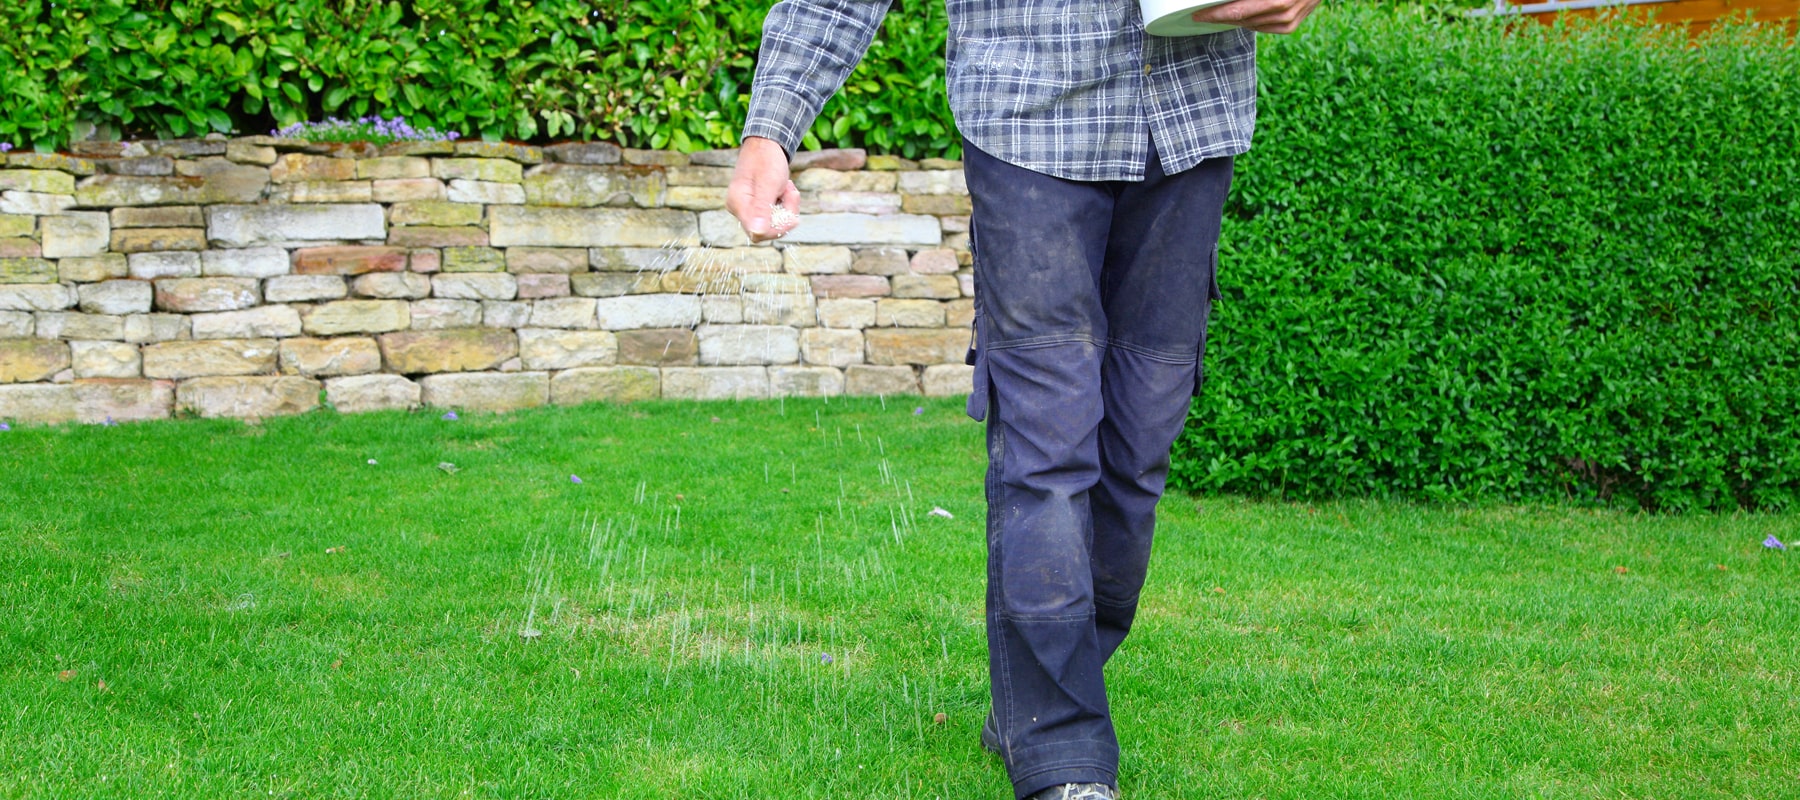 5 tips to look after your lawn